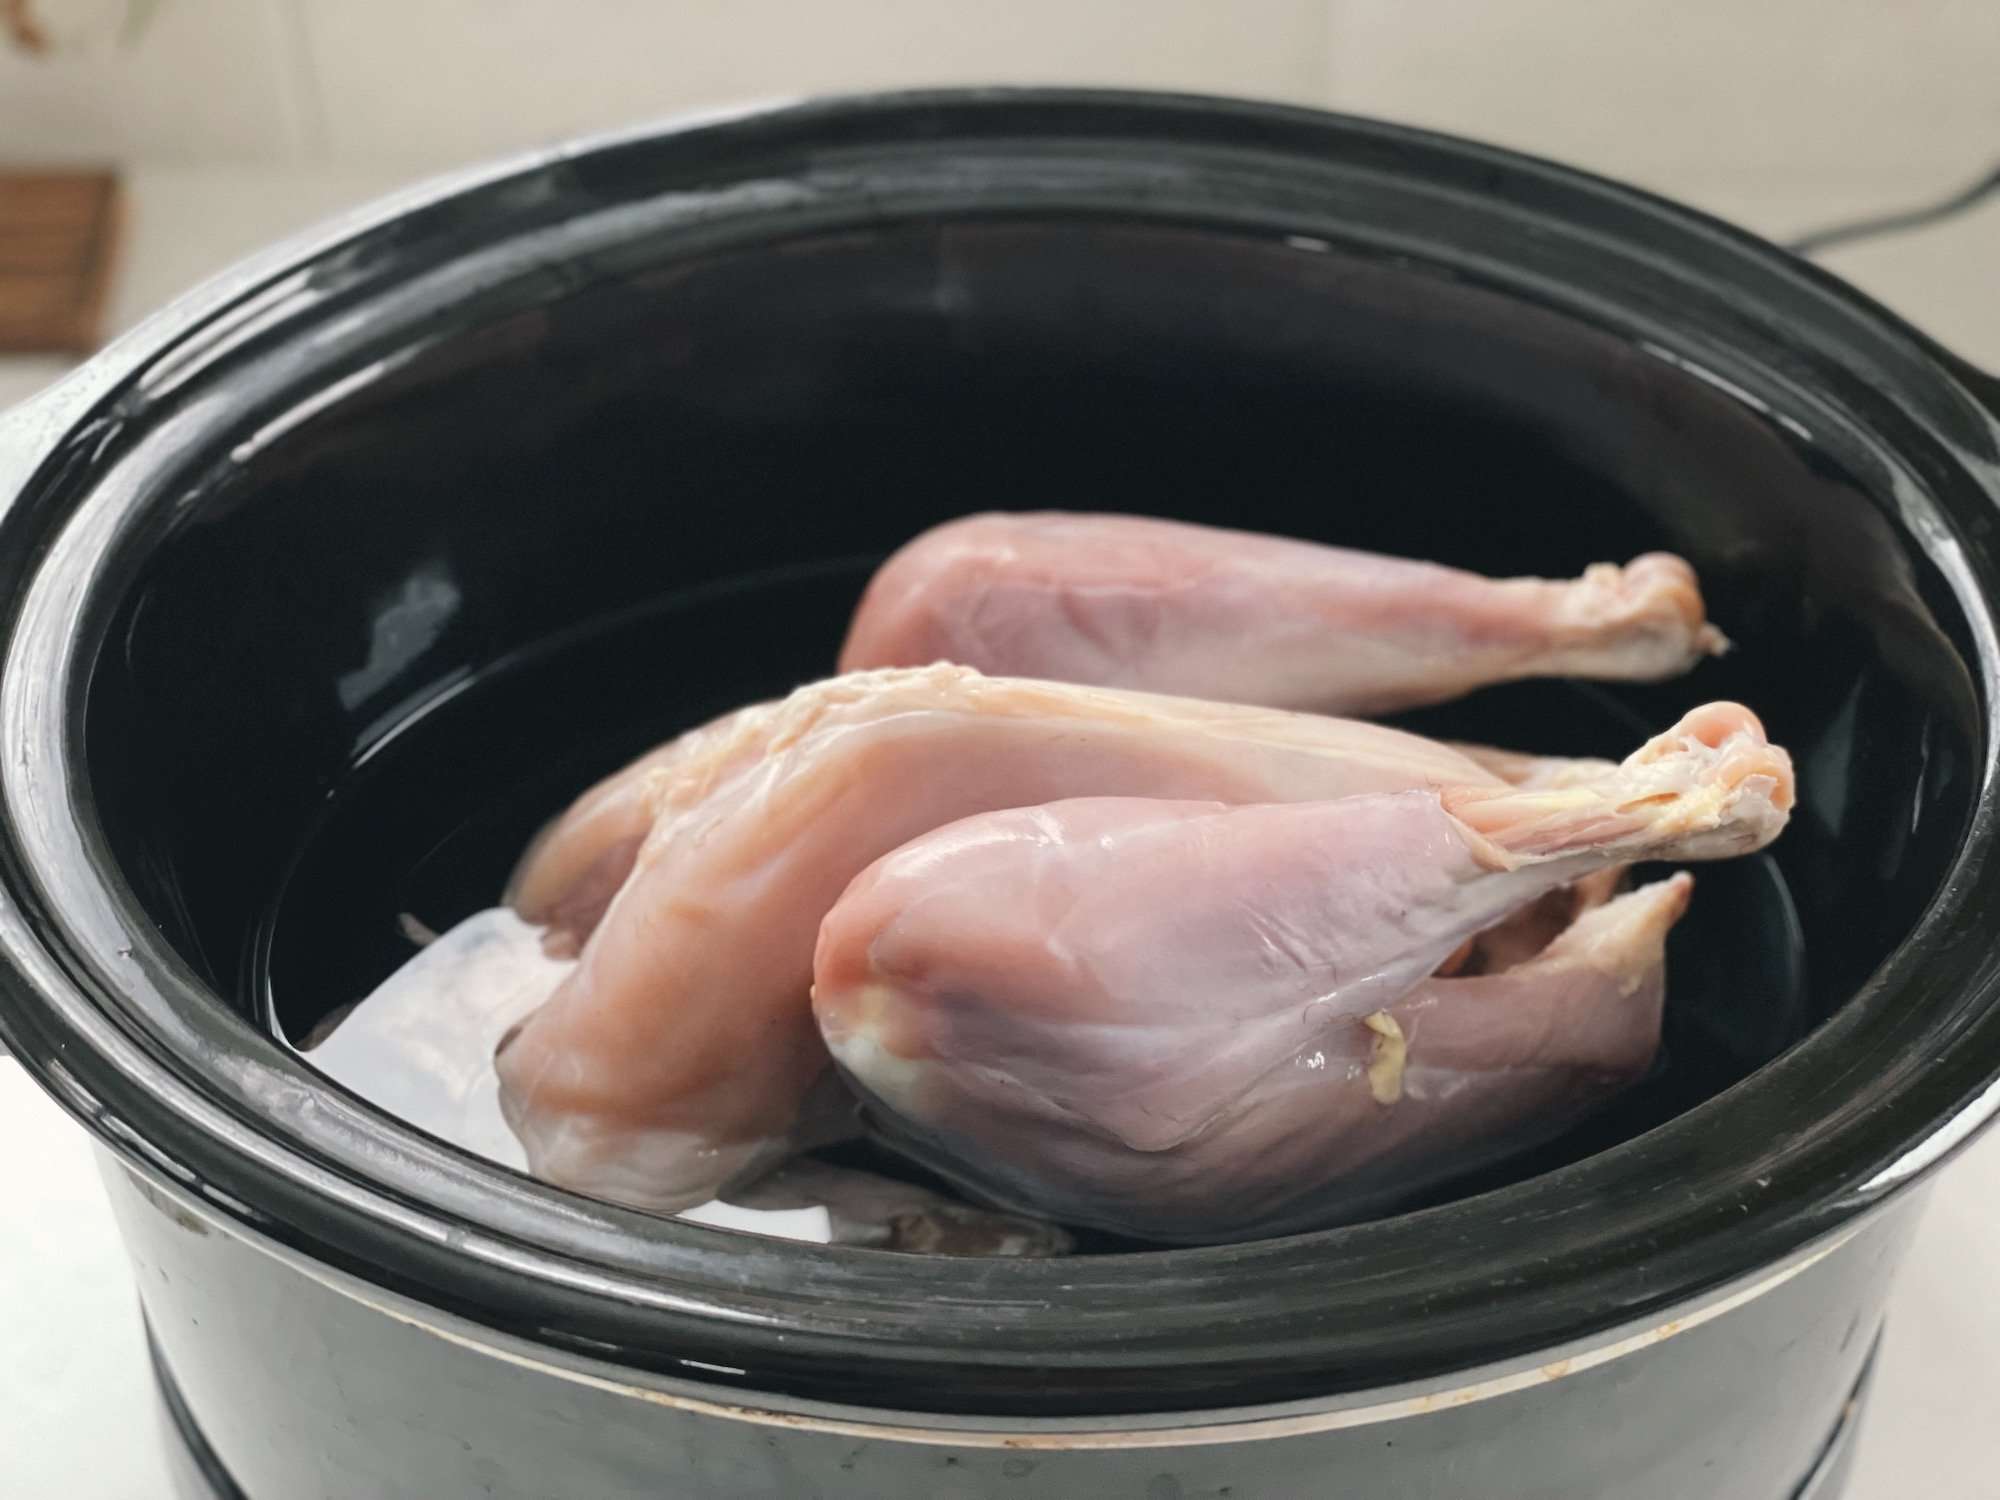 Young chicken in crockpot halfway filled with water